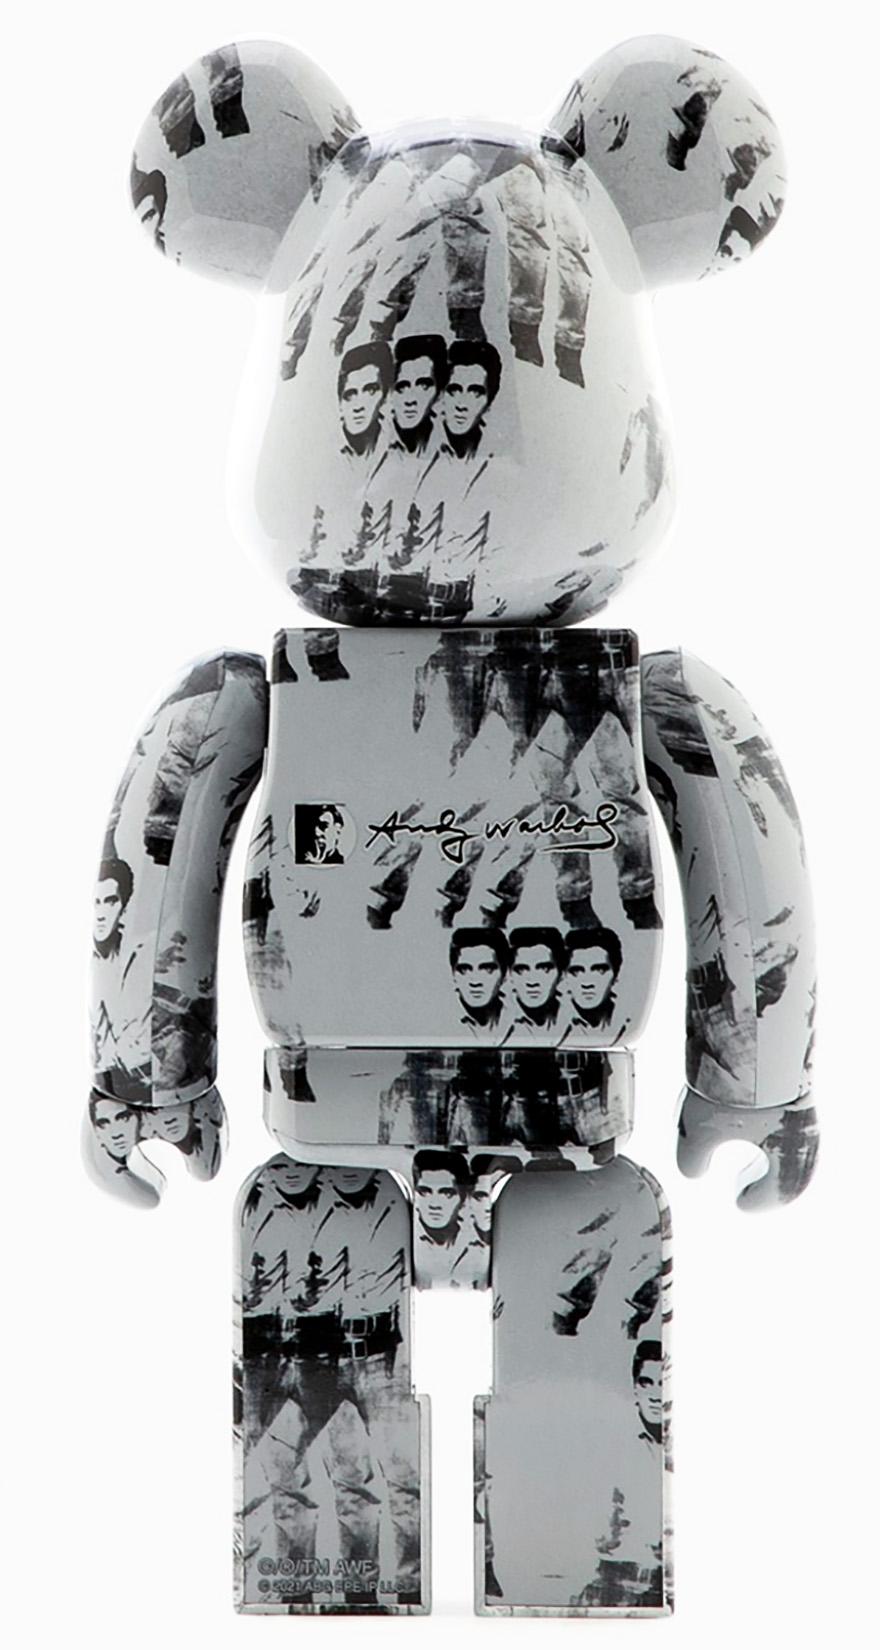 Andy Warhol Elvis Bearbrick Vinyl Figures: Set of two (400% & 100%):
A unique, timeless Andy Warhol Elvis collectible trademarked & licensed by the Estate of Andy Warhol. The partnered collectible reveals Warhol's iconic Triple Elvis wrapping the